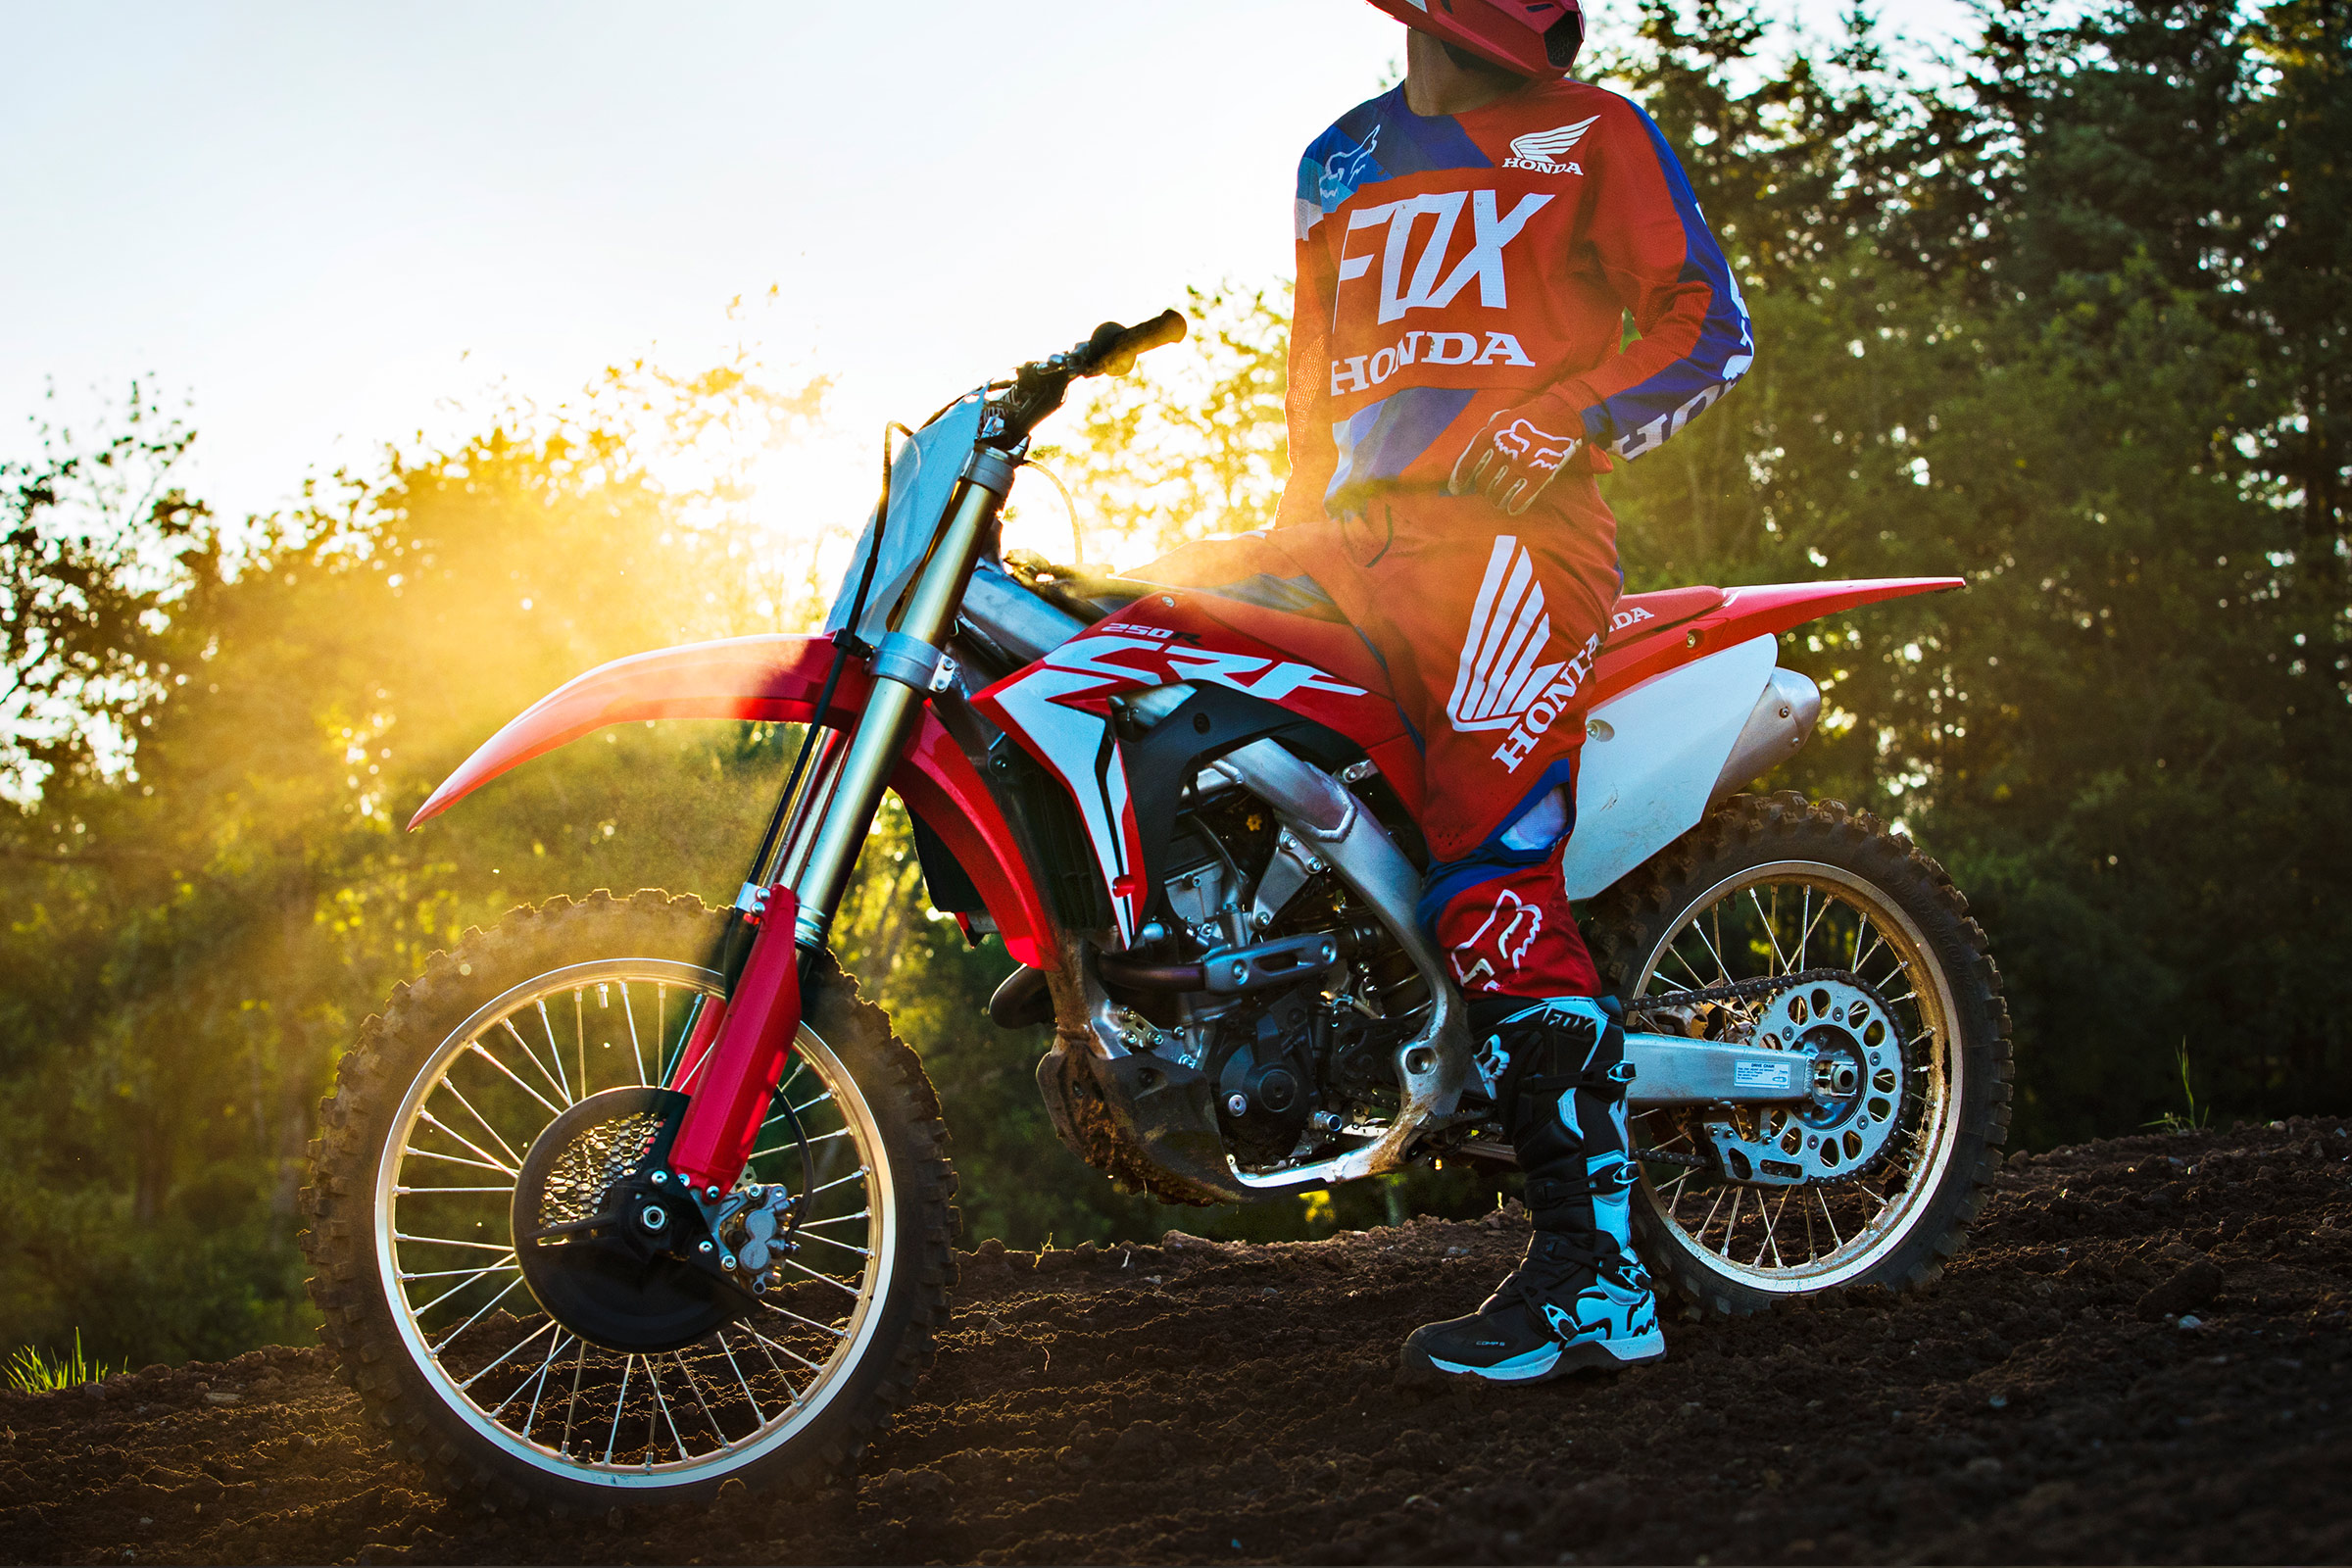 2018 Honda Crf250r First Ride Review 1615